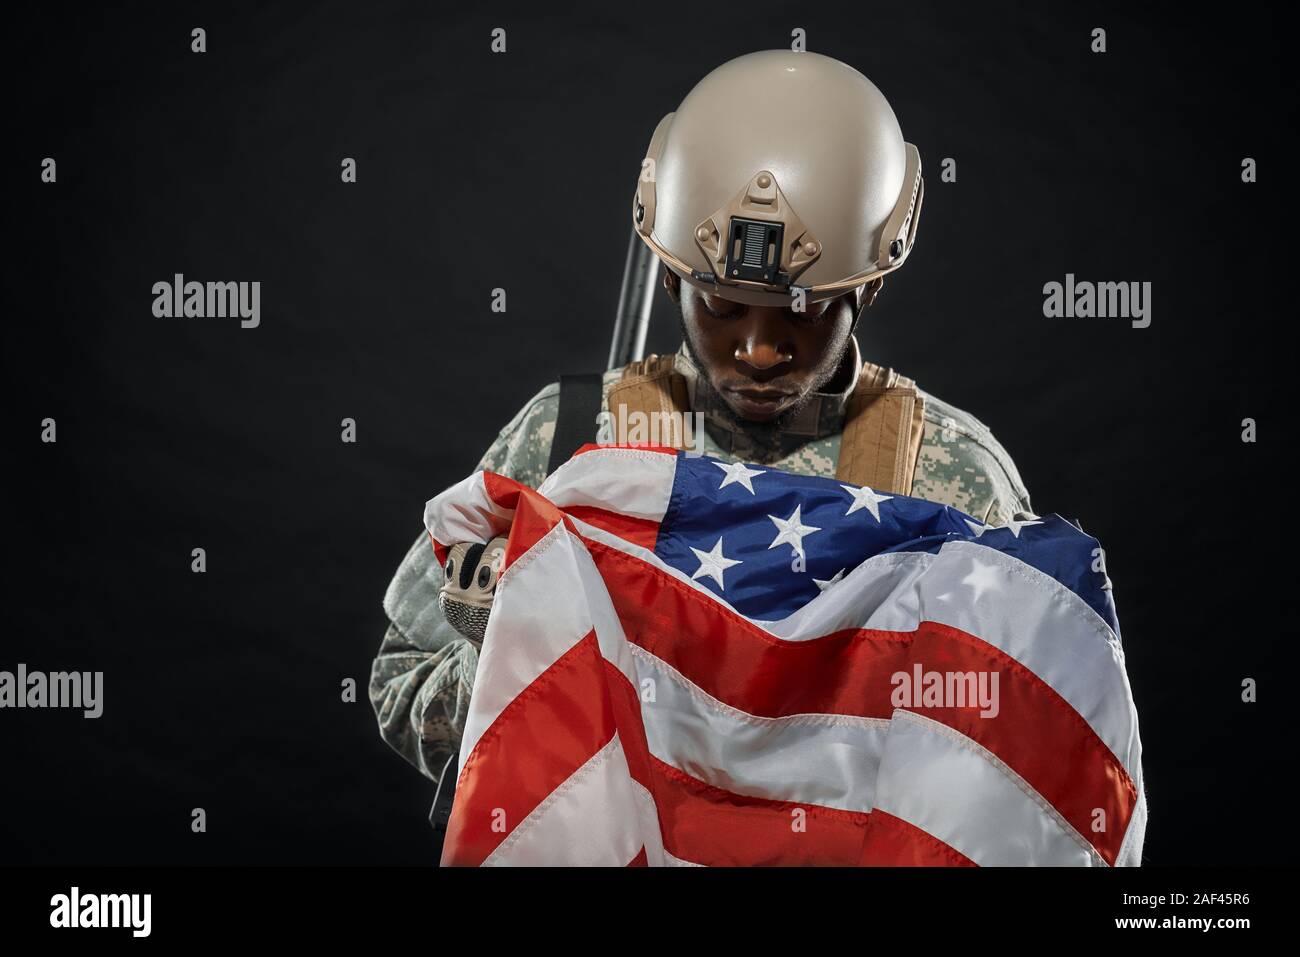 Front view of American soldier wearing uniform and helmet on head holding nationals flag in hands. Ranker sadly looking on American flag. Black isolated background. Stock Photo